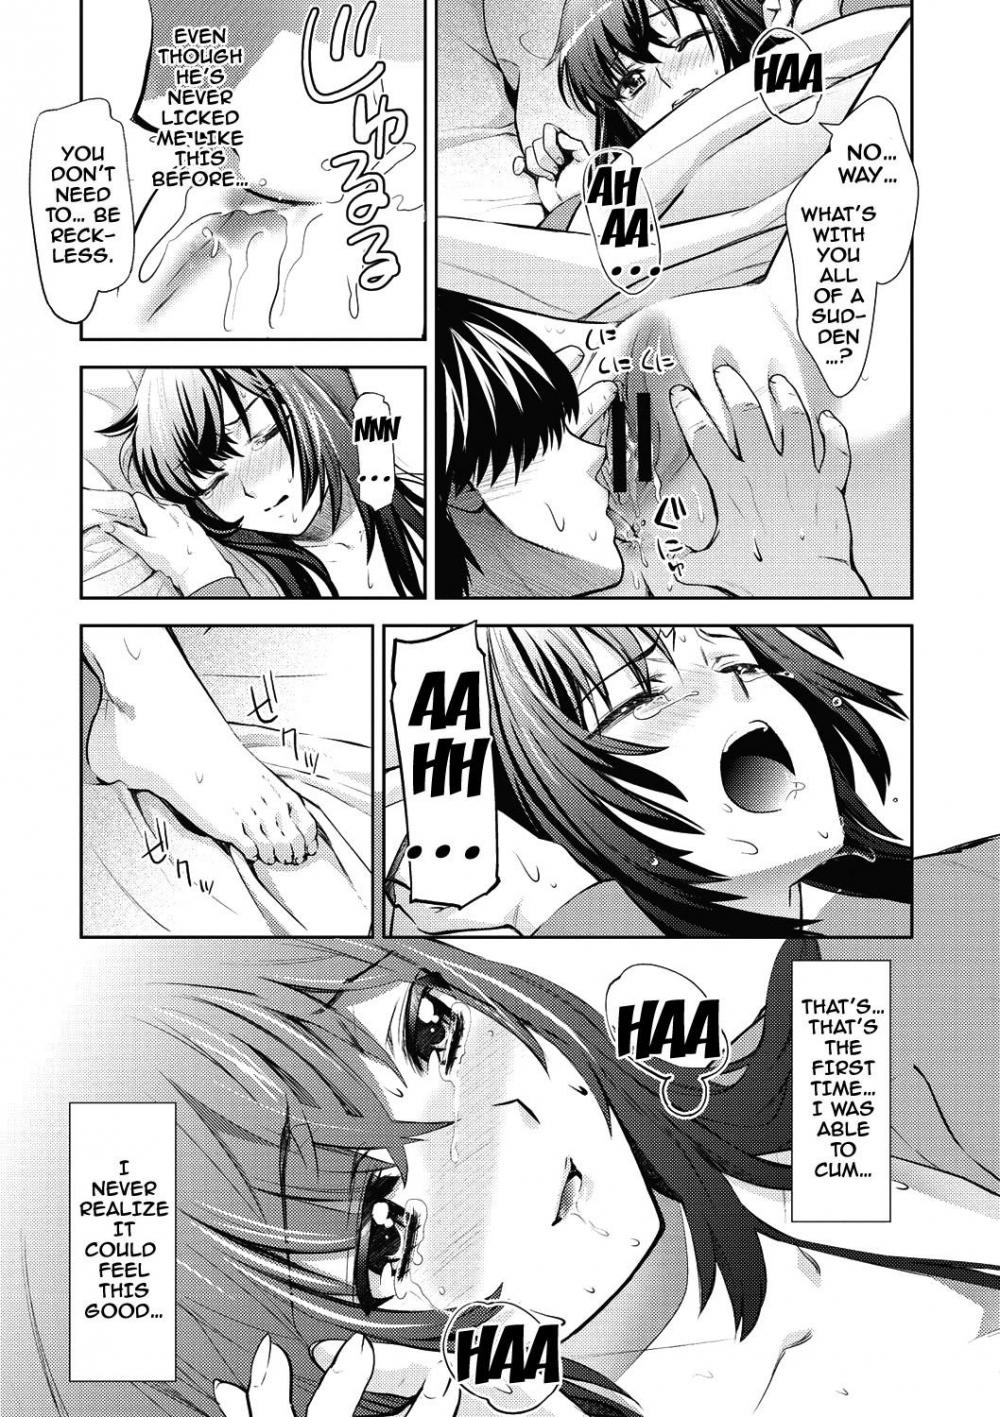 Hentai Manga Comic-From Now On She'll Be Doing NTR-Chapter 11-6